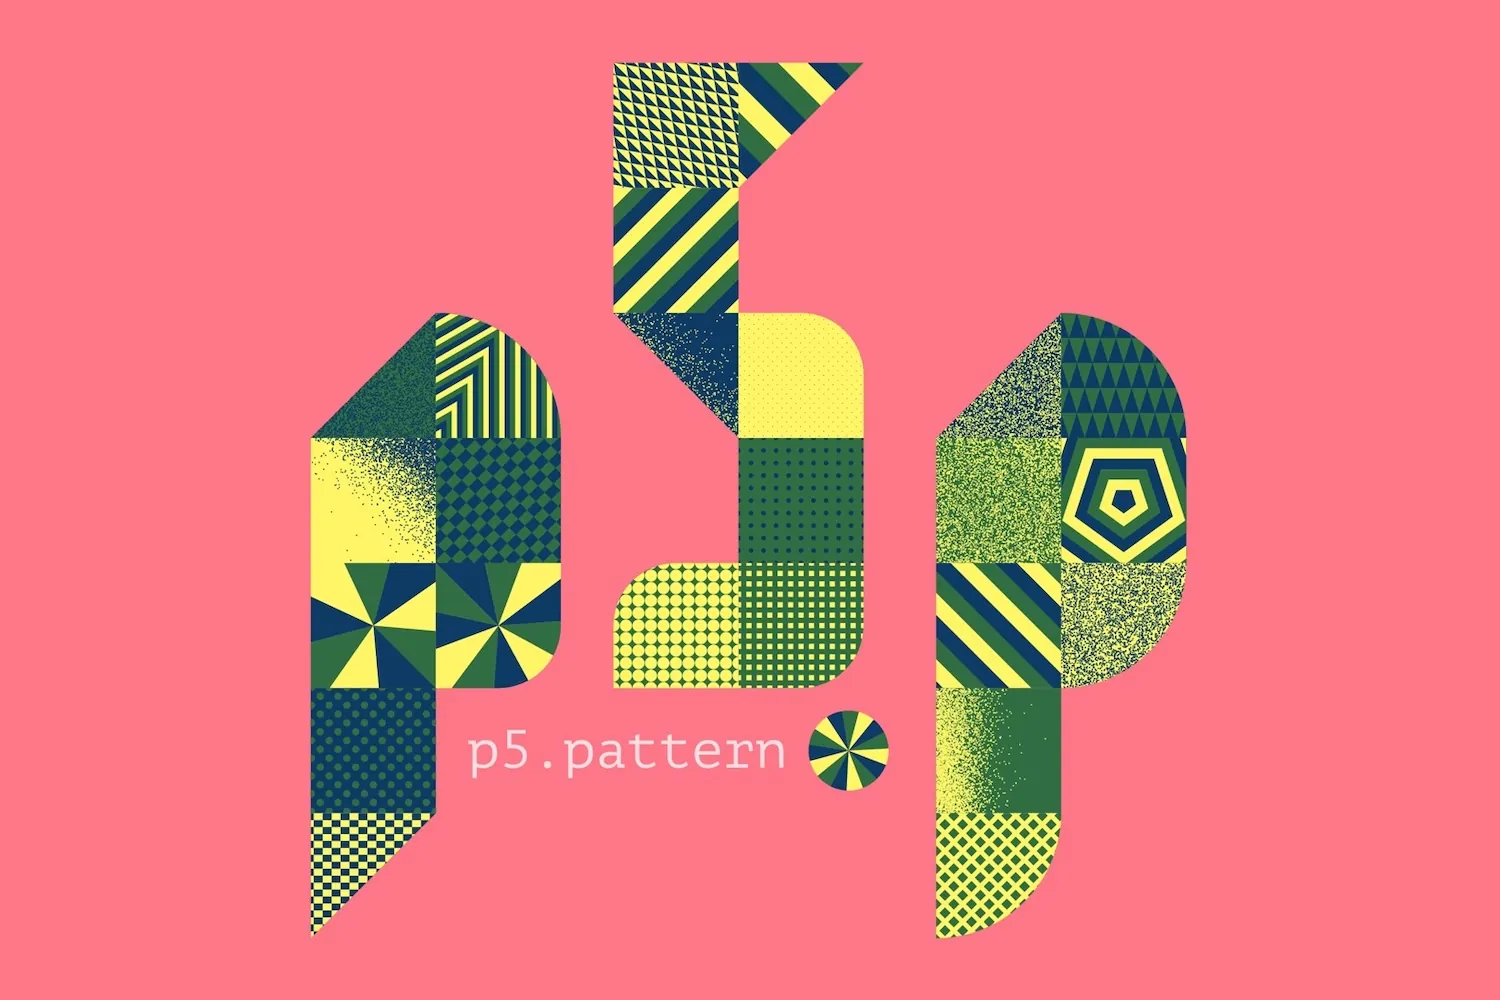 The text 'p5.p' fileld with a checkerboard of different patterns